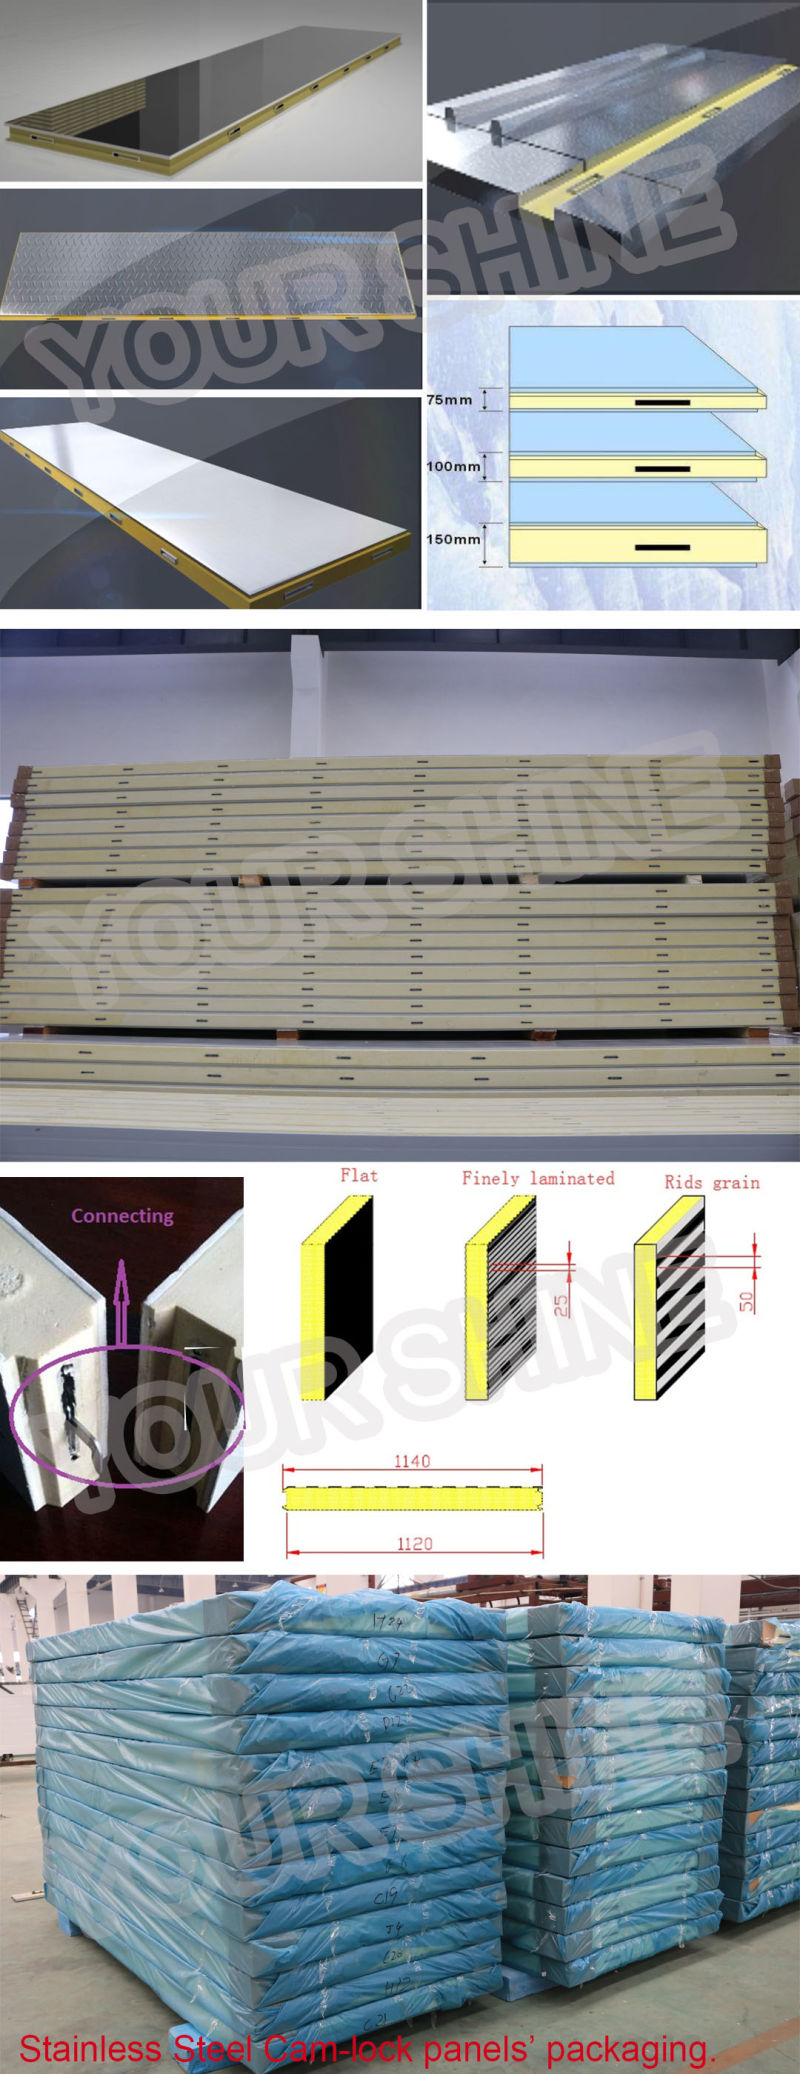 PU Sandwich Panels / Polyurethane (PUF) Panels / Puf Panels for Roofing/Cladding, Walls/Ceiling/Partitions +86 18217460170 Dubai